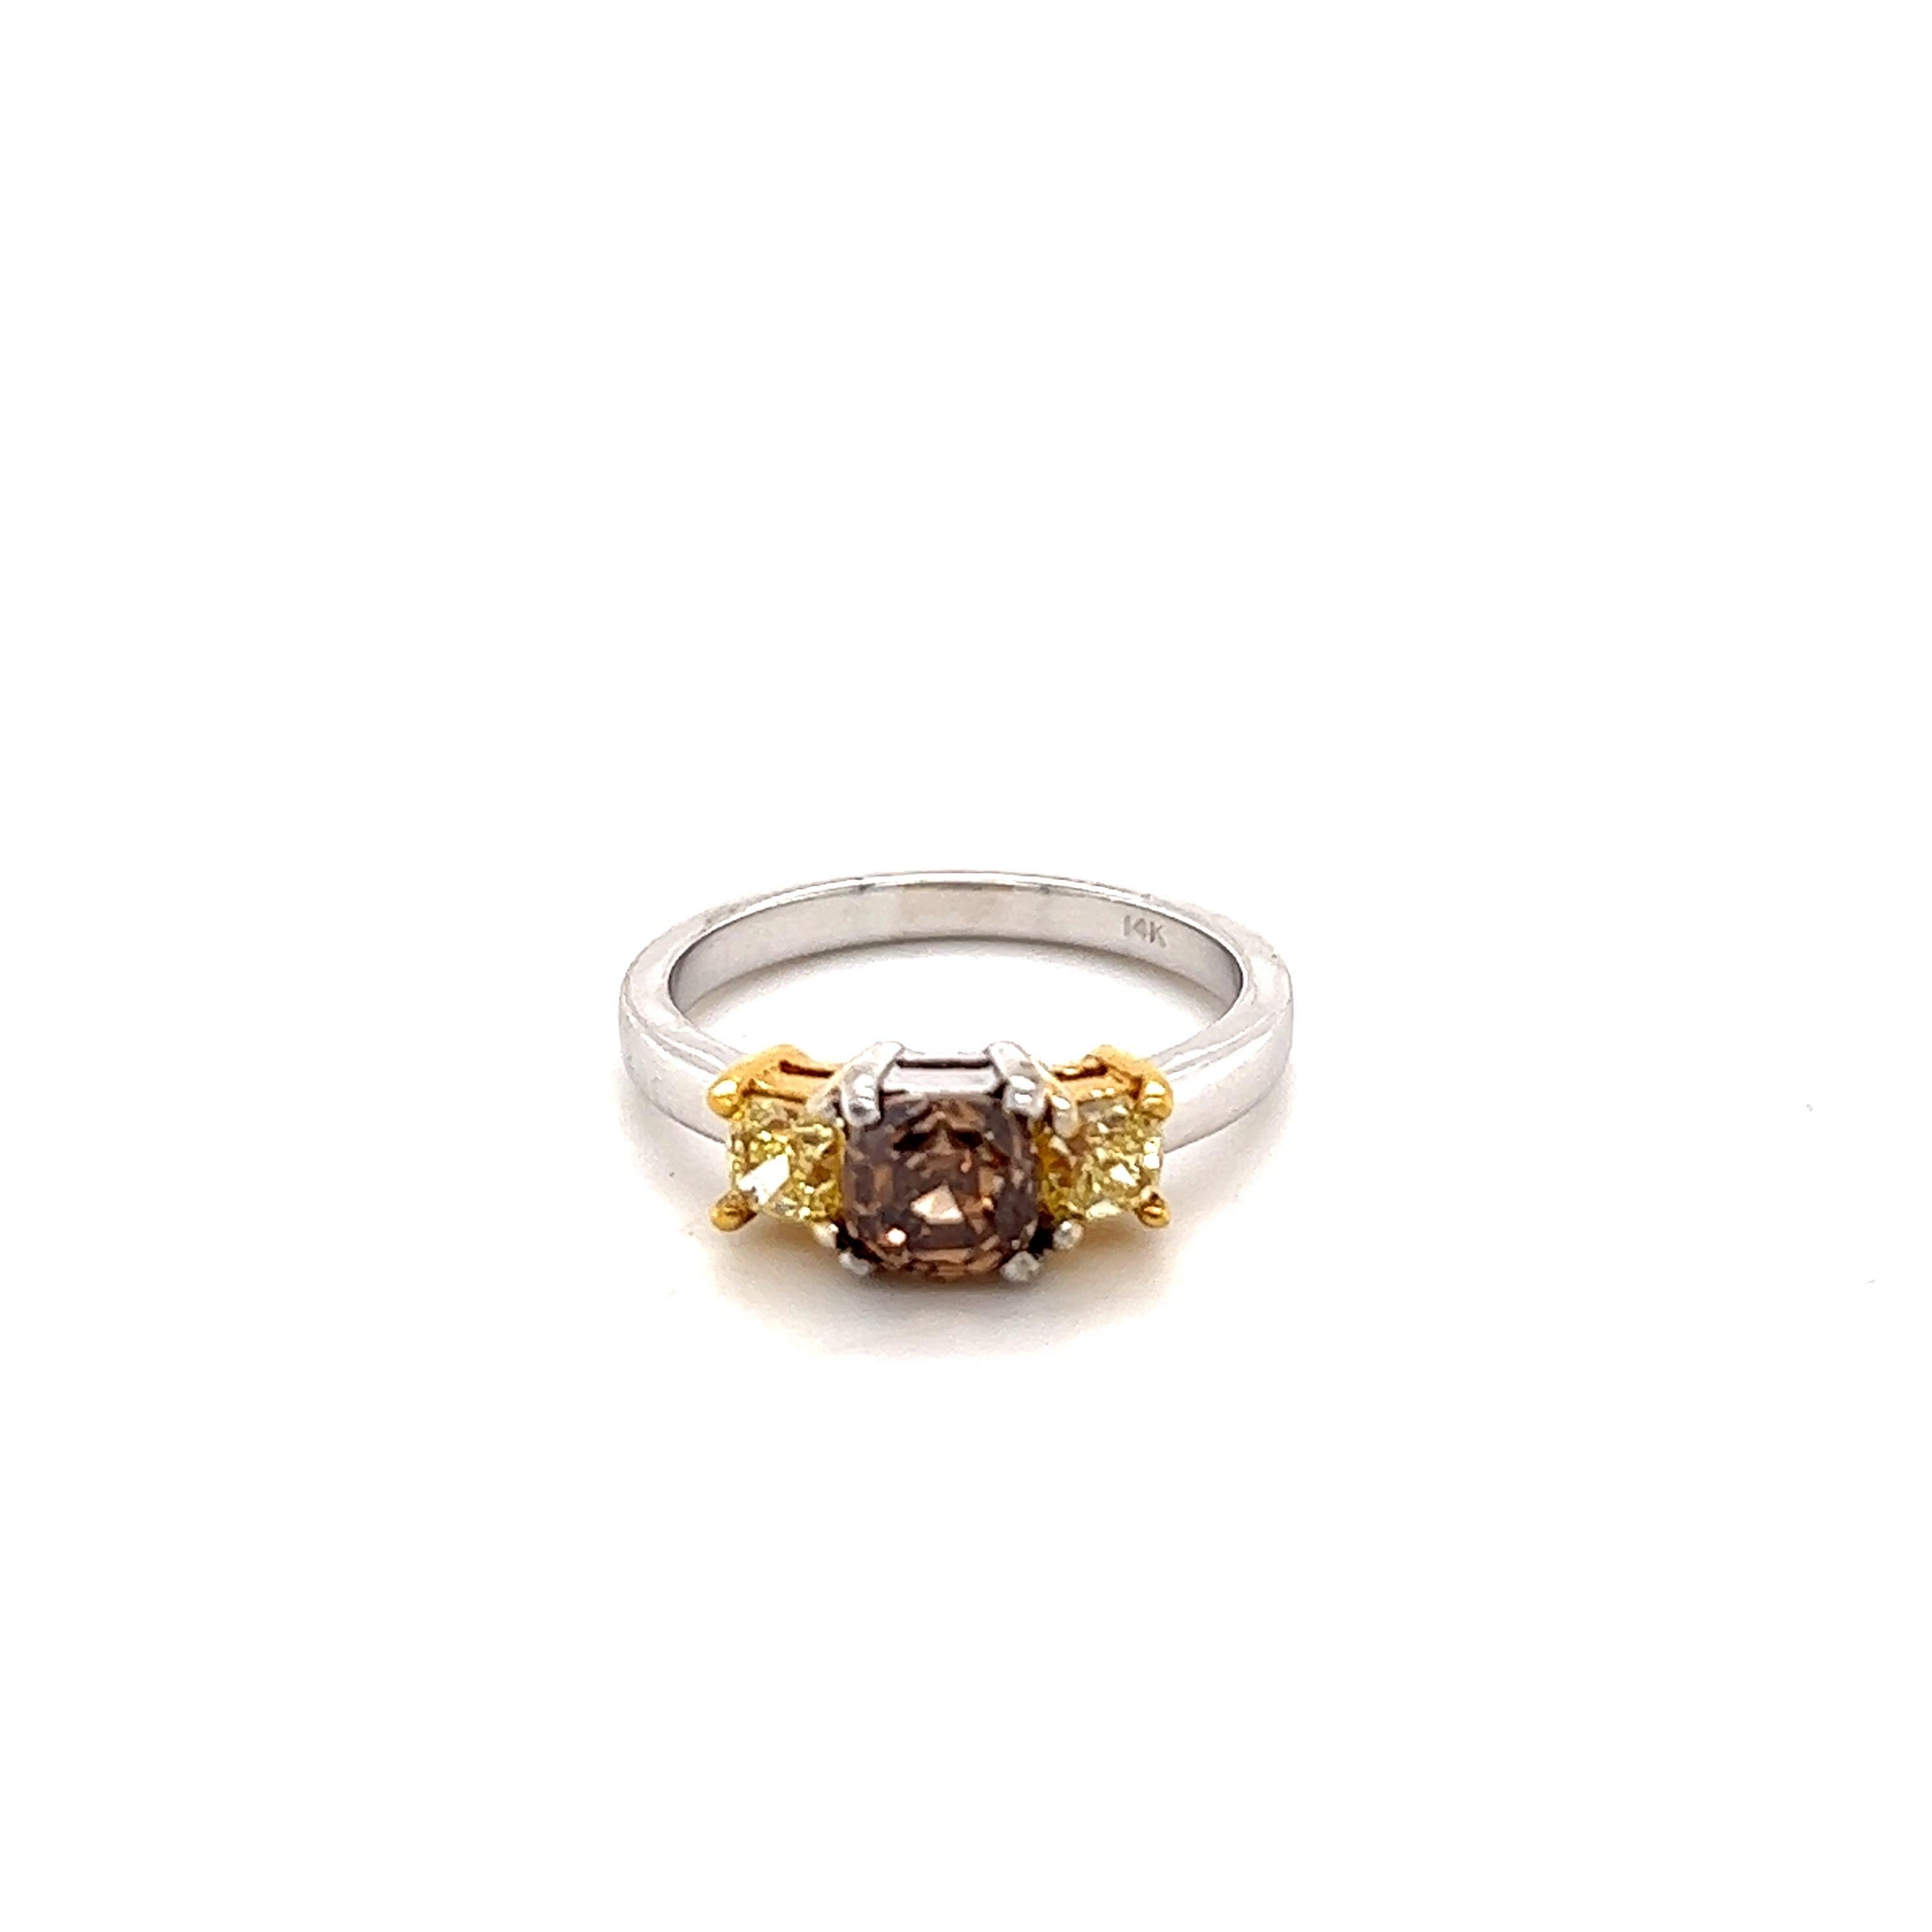 Natural Brown Diamond Natural Yellow Diamond Three Stone Engagement Ring

The Asscher Cut Brown Diamond weighs 1.02 Carats, Clarity: VS and has 2 Asscher Cut Yellow Diamonds on each side that weigh 0.62 Carats, Clarity: VS The total carat weight of